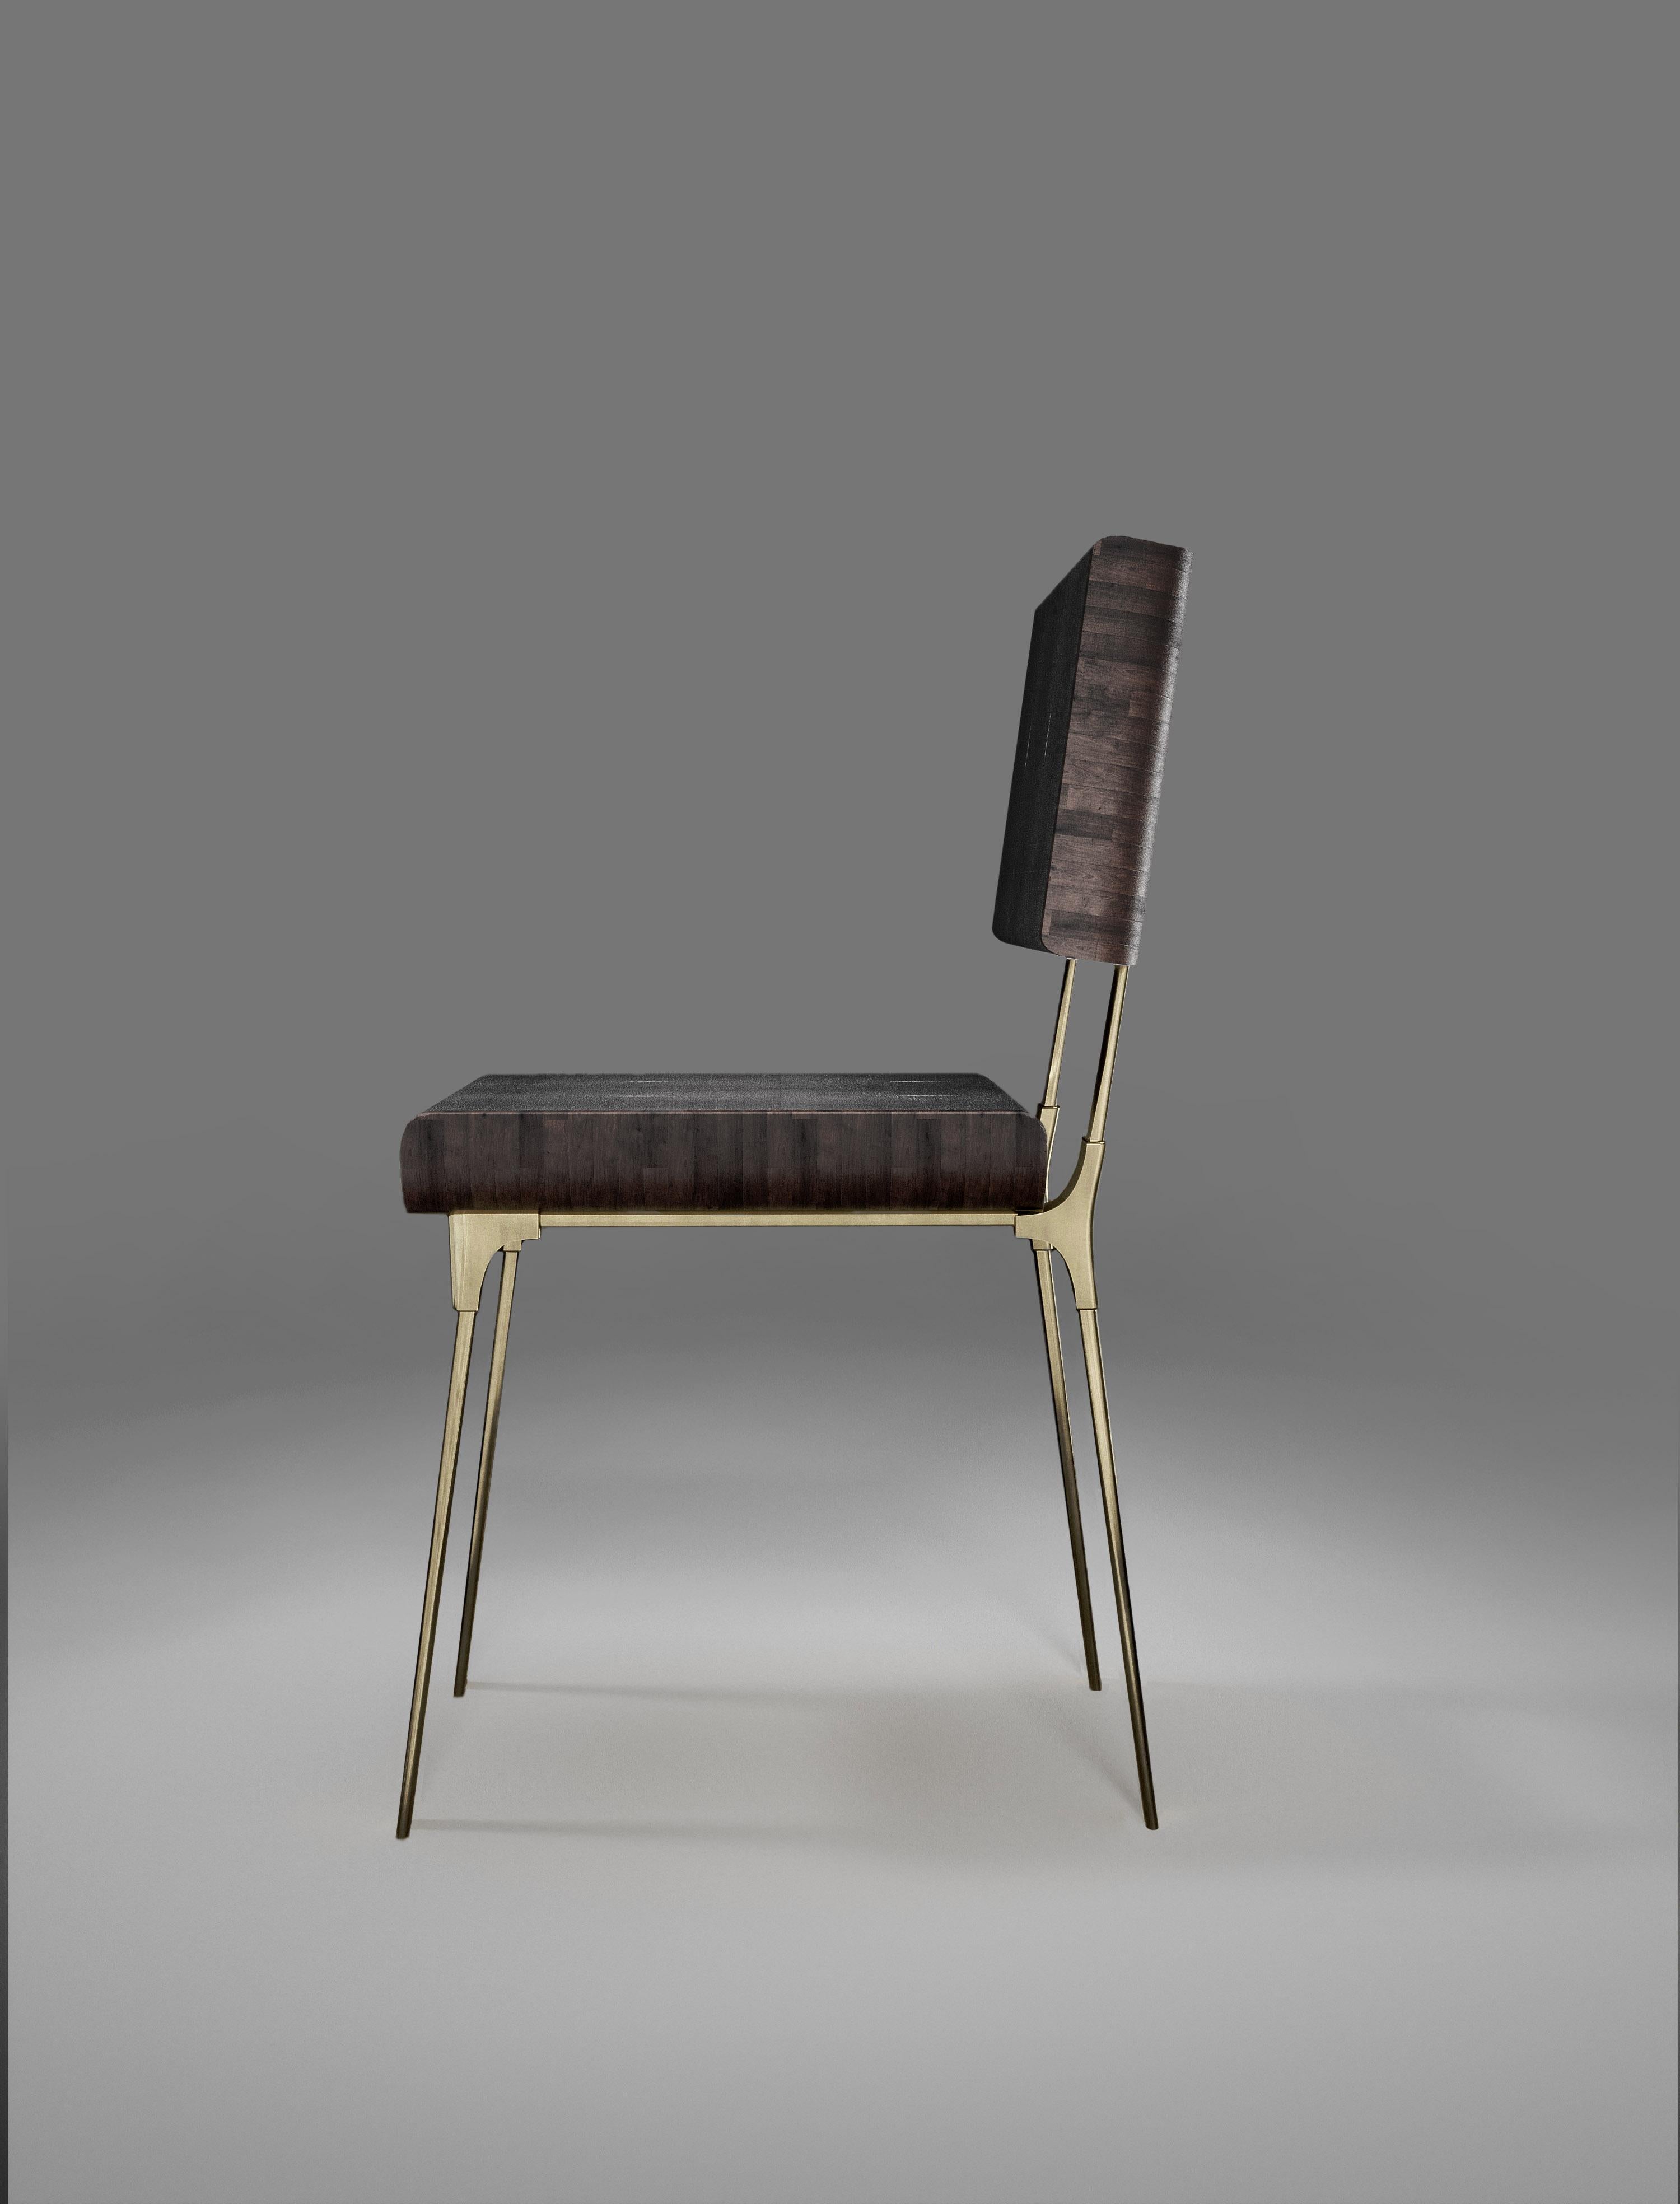 Inspired by the original Dandy bench by Kifu Paris (see images at end of slide), the Dandy II chair is the ultimate luxury seating for a dining room or corner area. The seating area is inlaid in coal black shagreen and the legs, frame and sides of